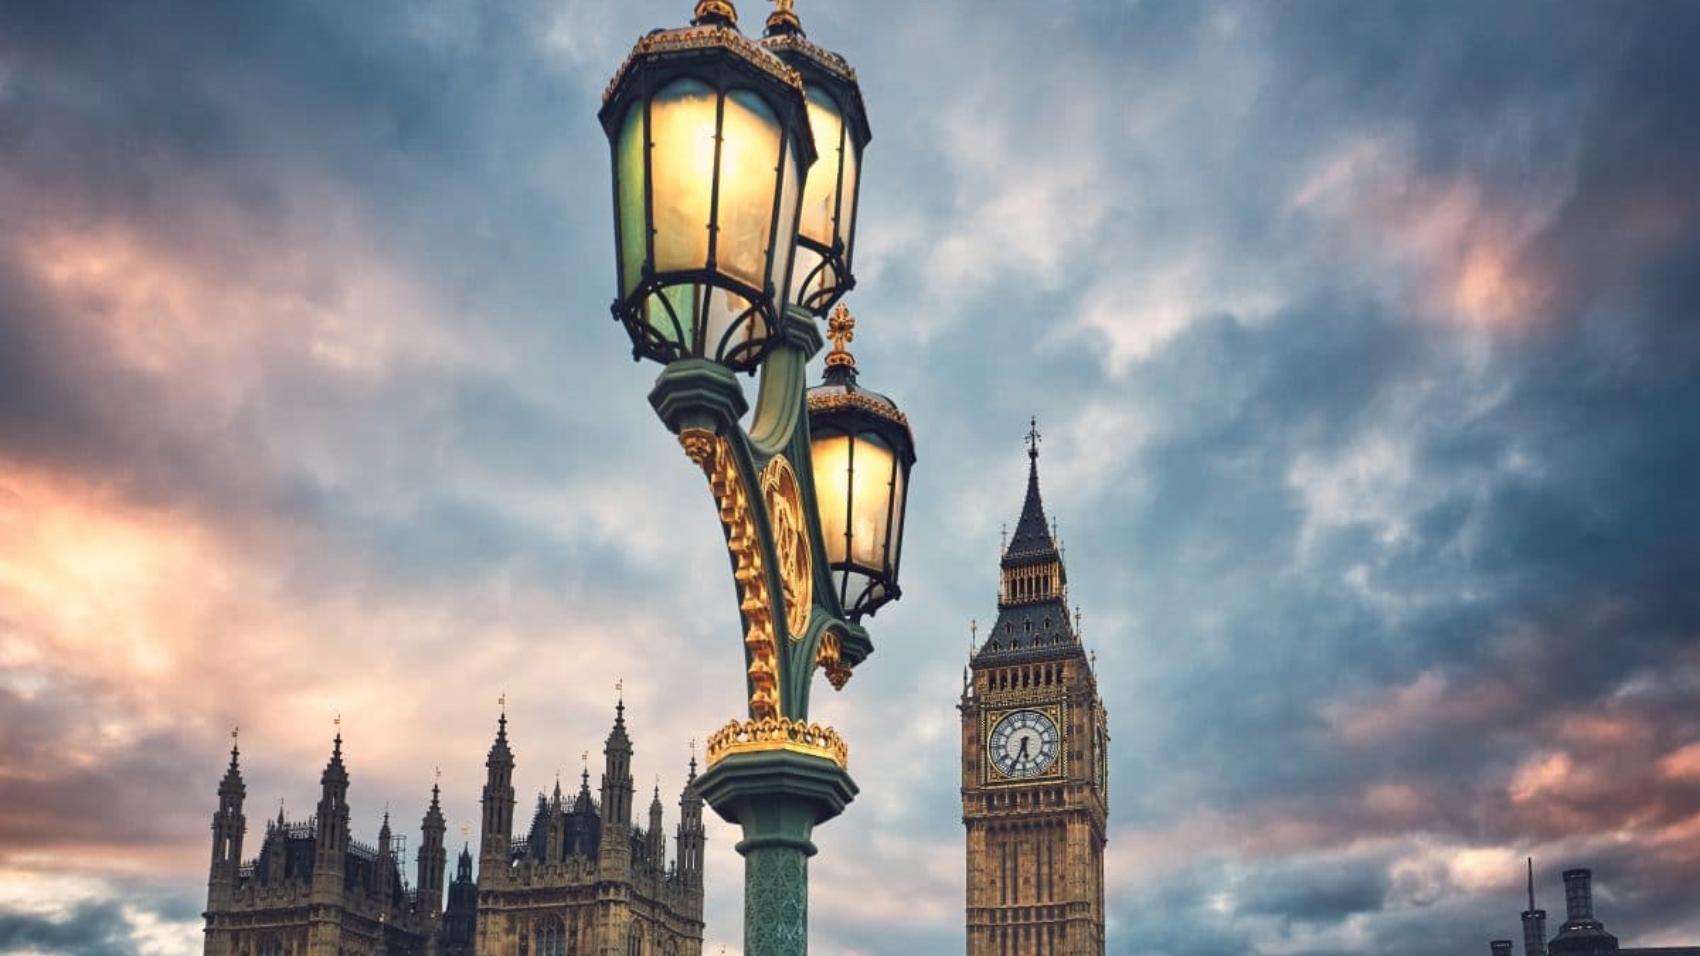 Big Ben and Houses of Parliament at dusk, London, United Kingdom - selective focus